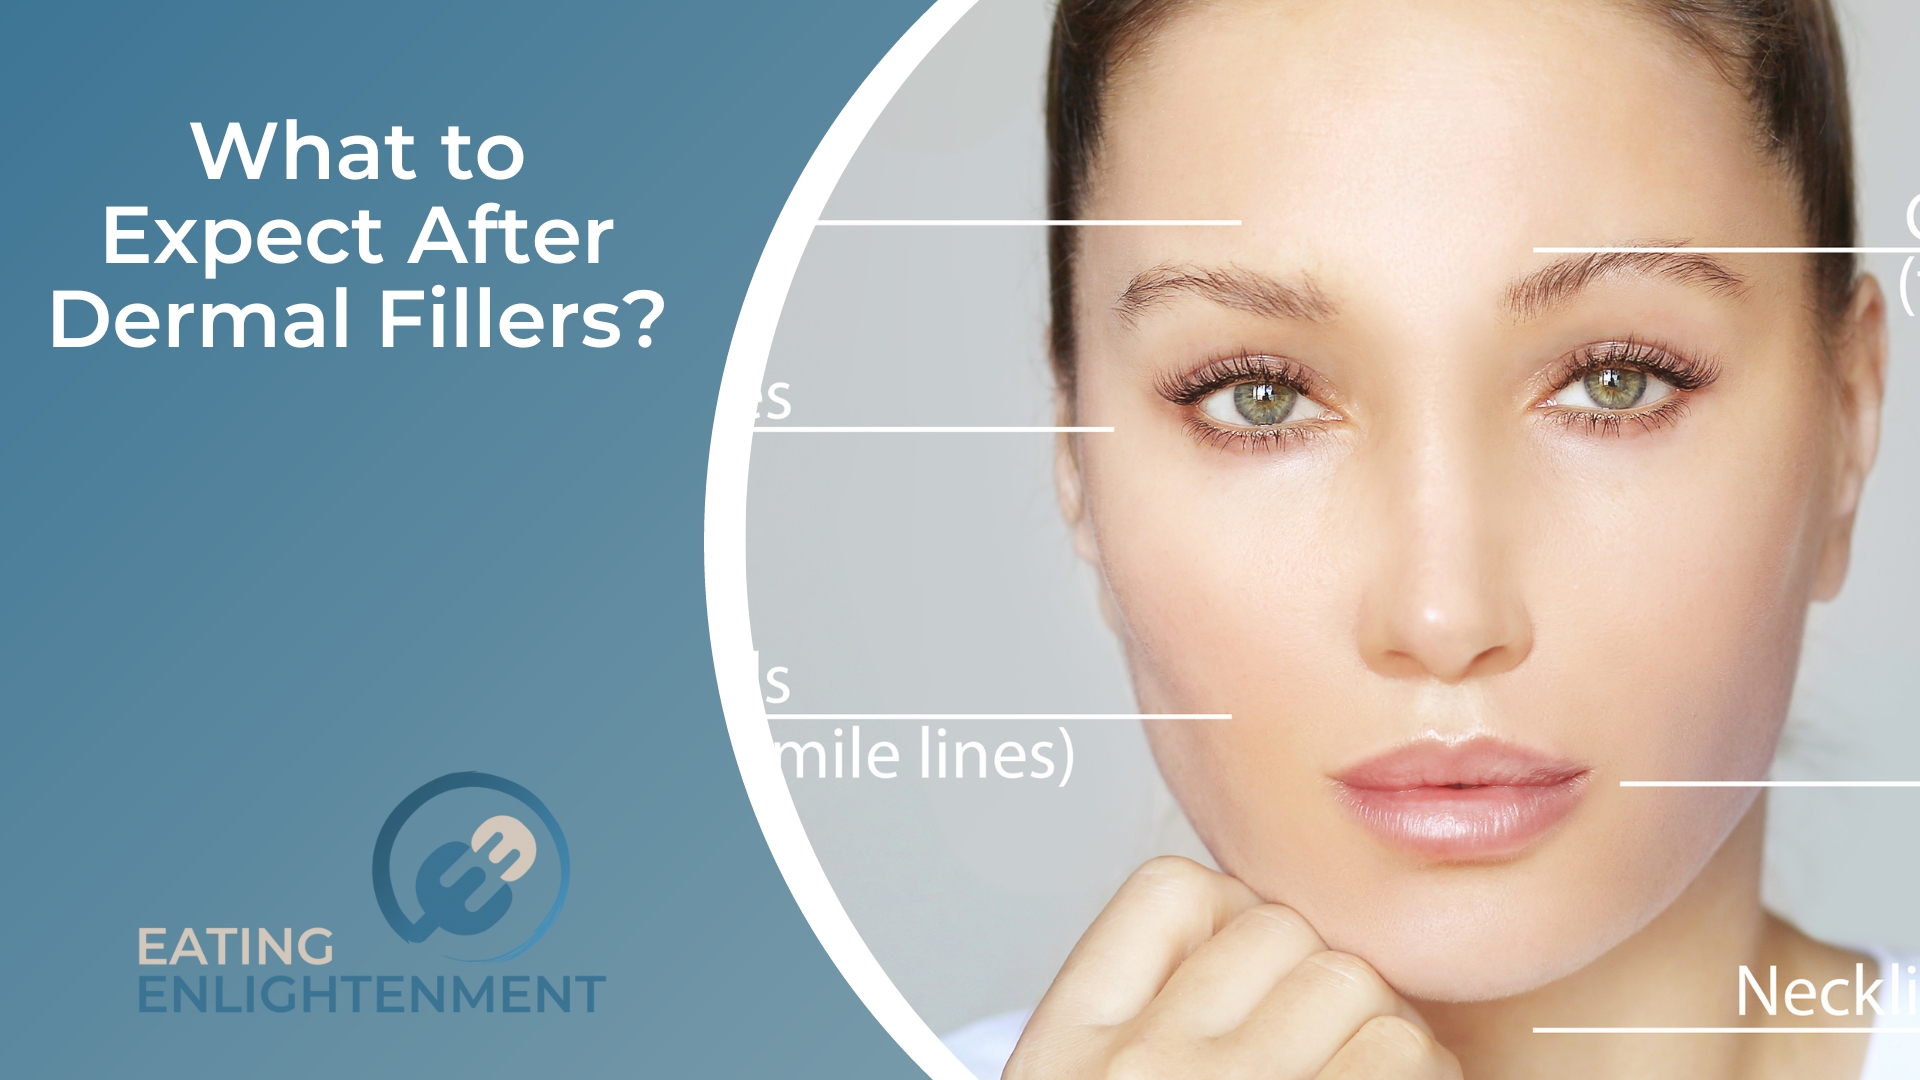 What to Expect After Dermal Fillers